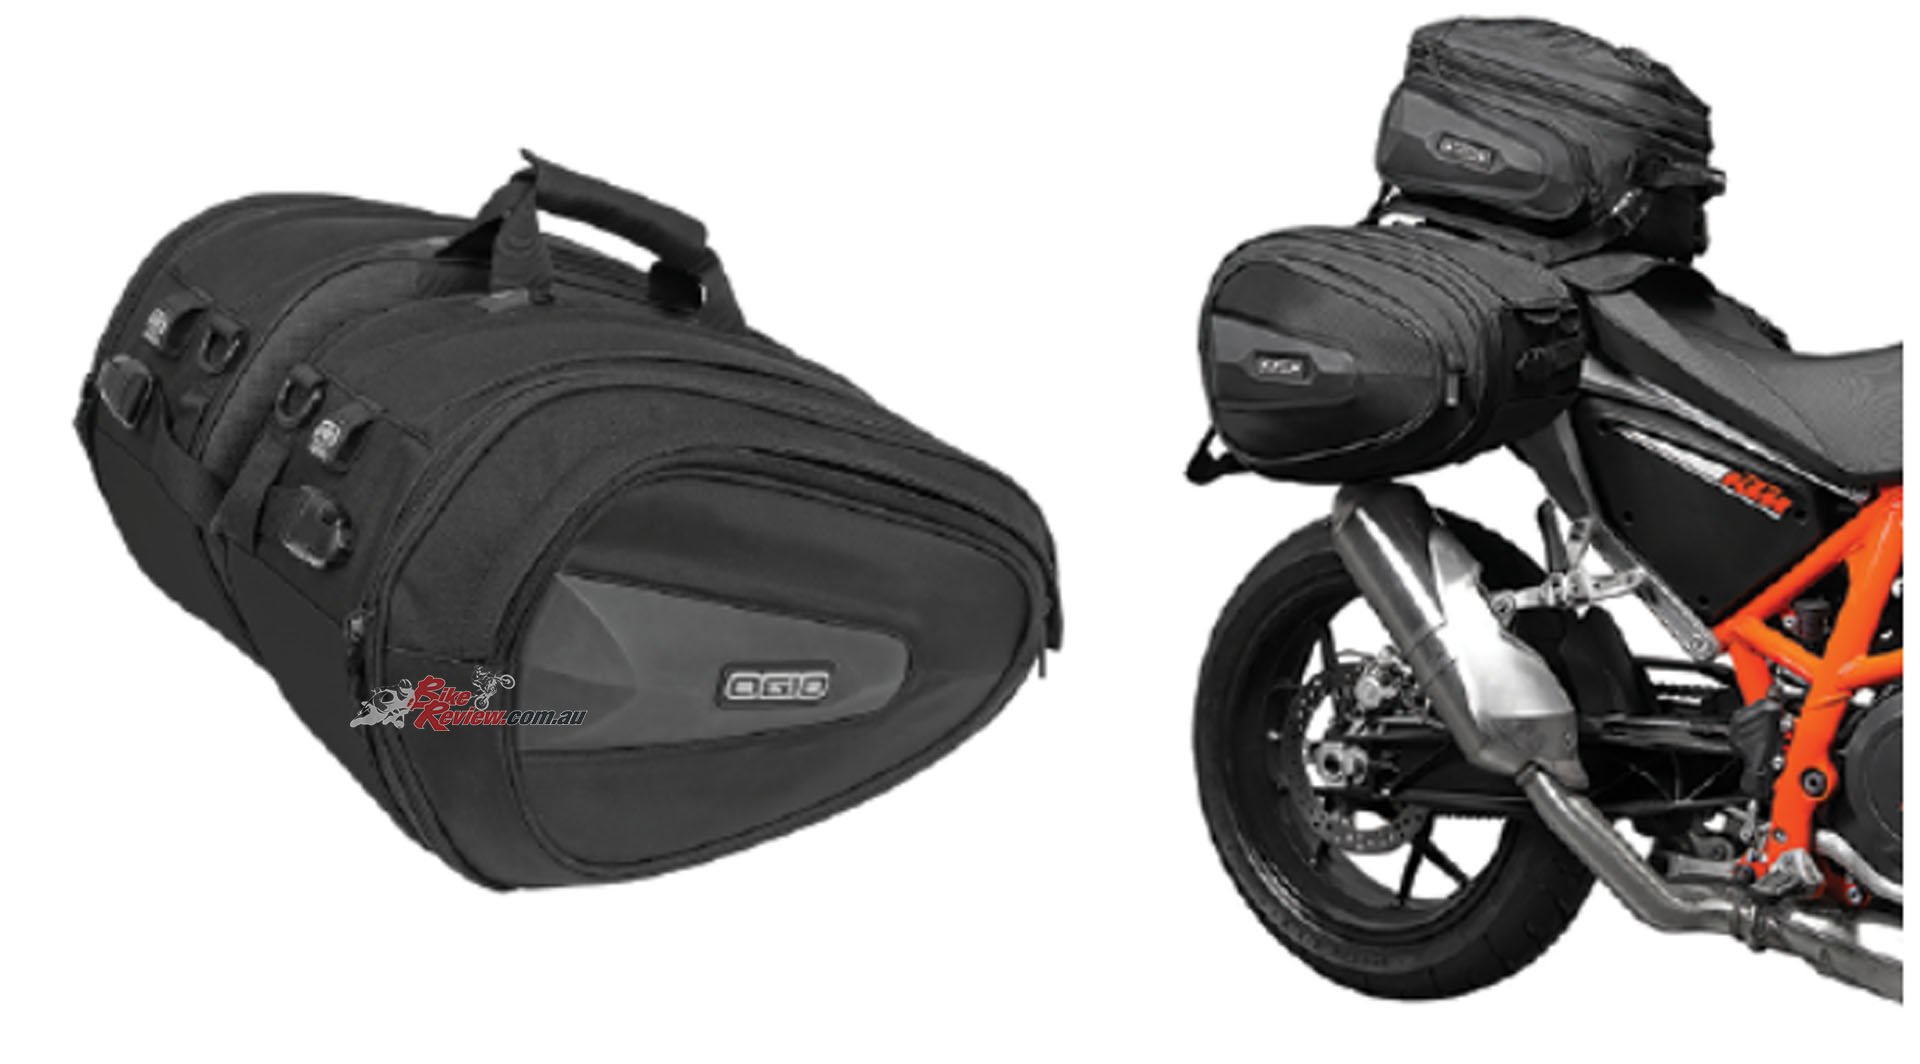 You can pick up the OGIO Saddlebags 2.0 for an RRP of just $289.95.